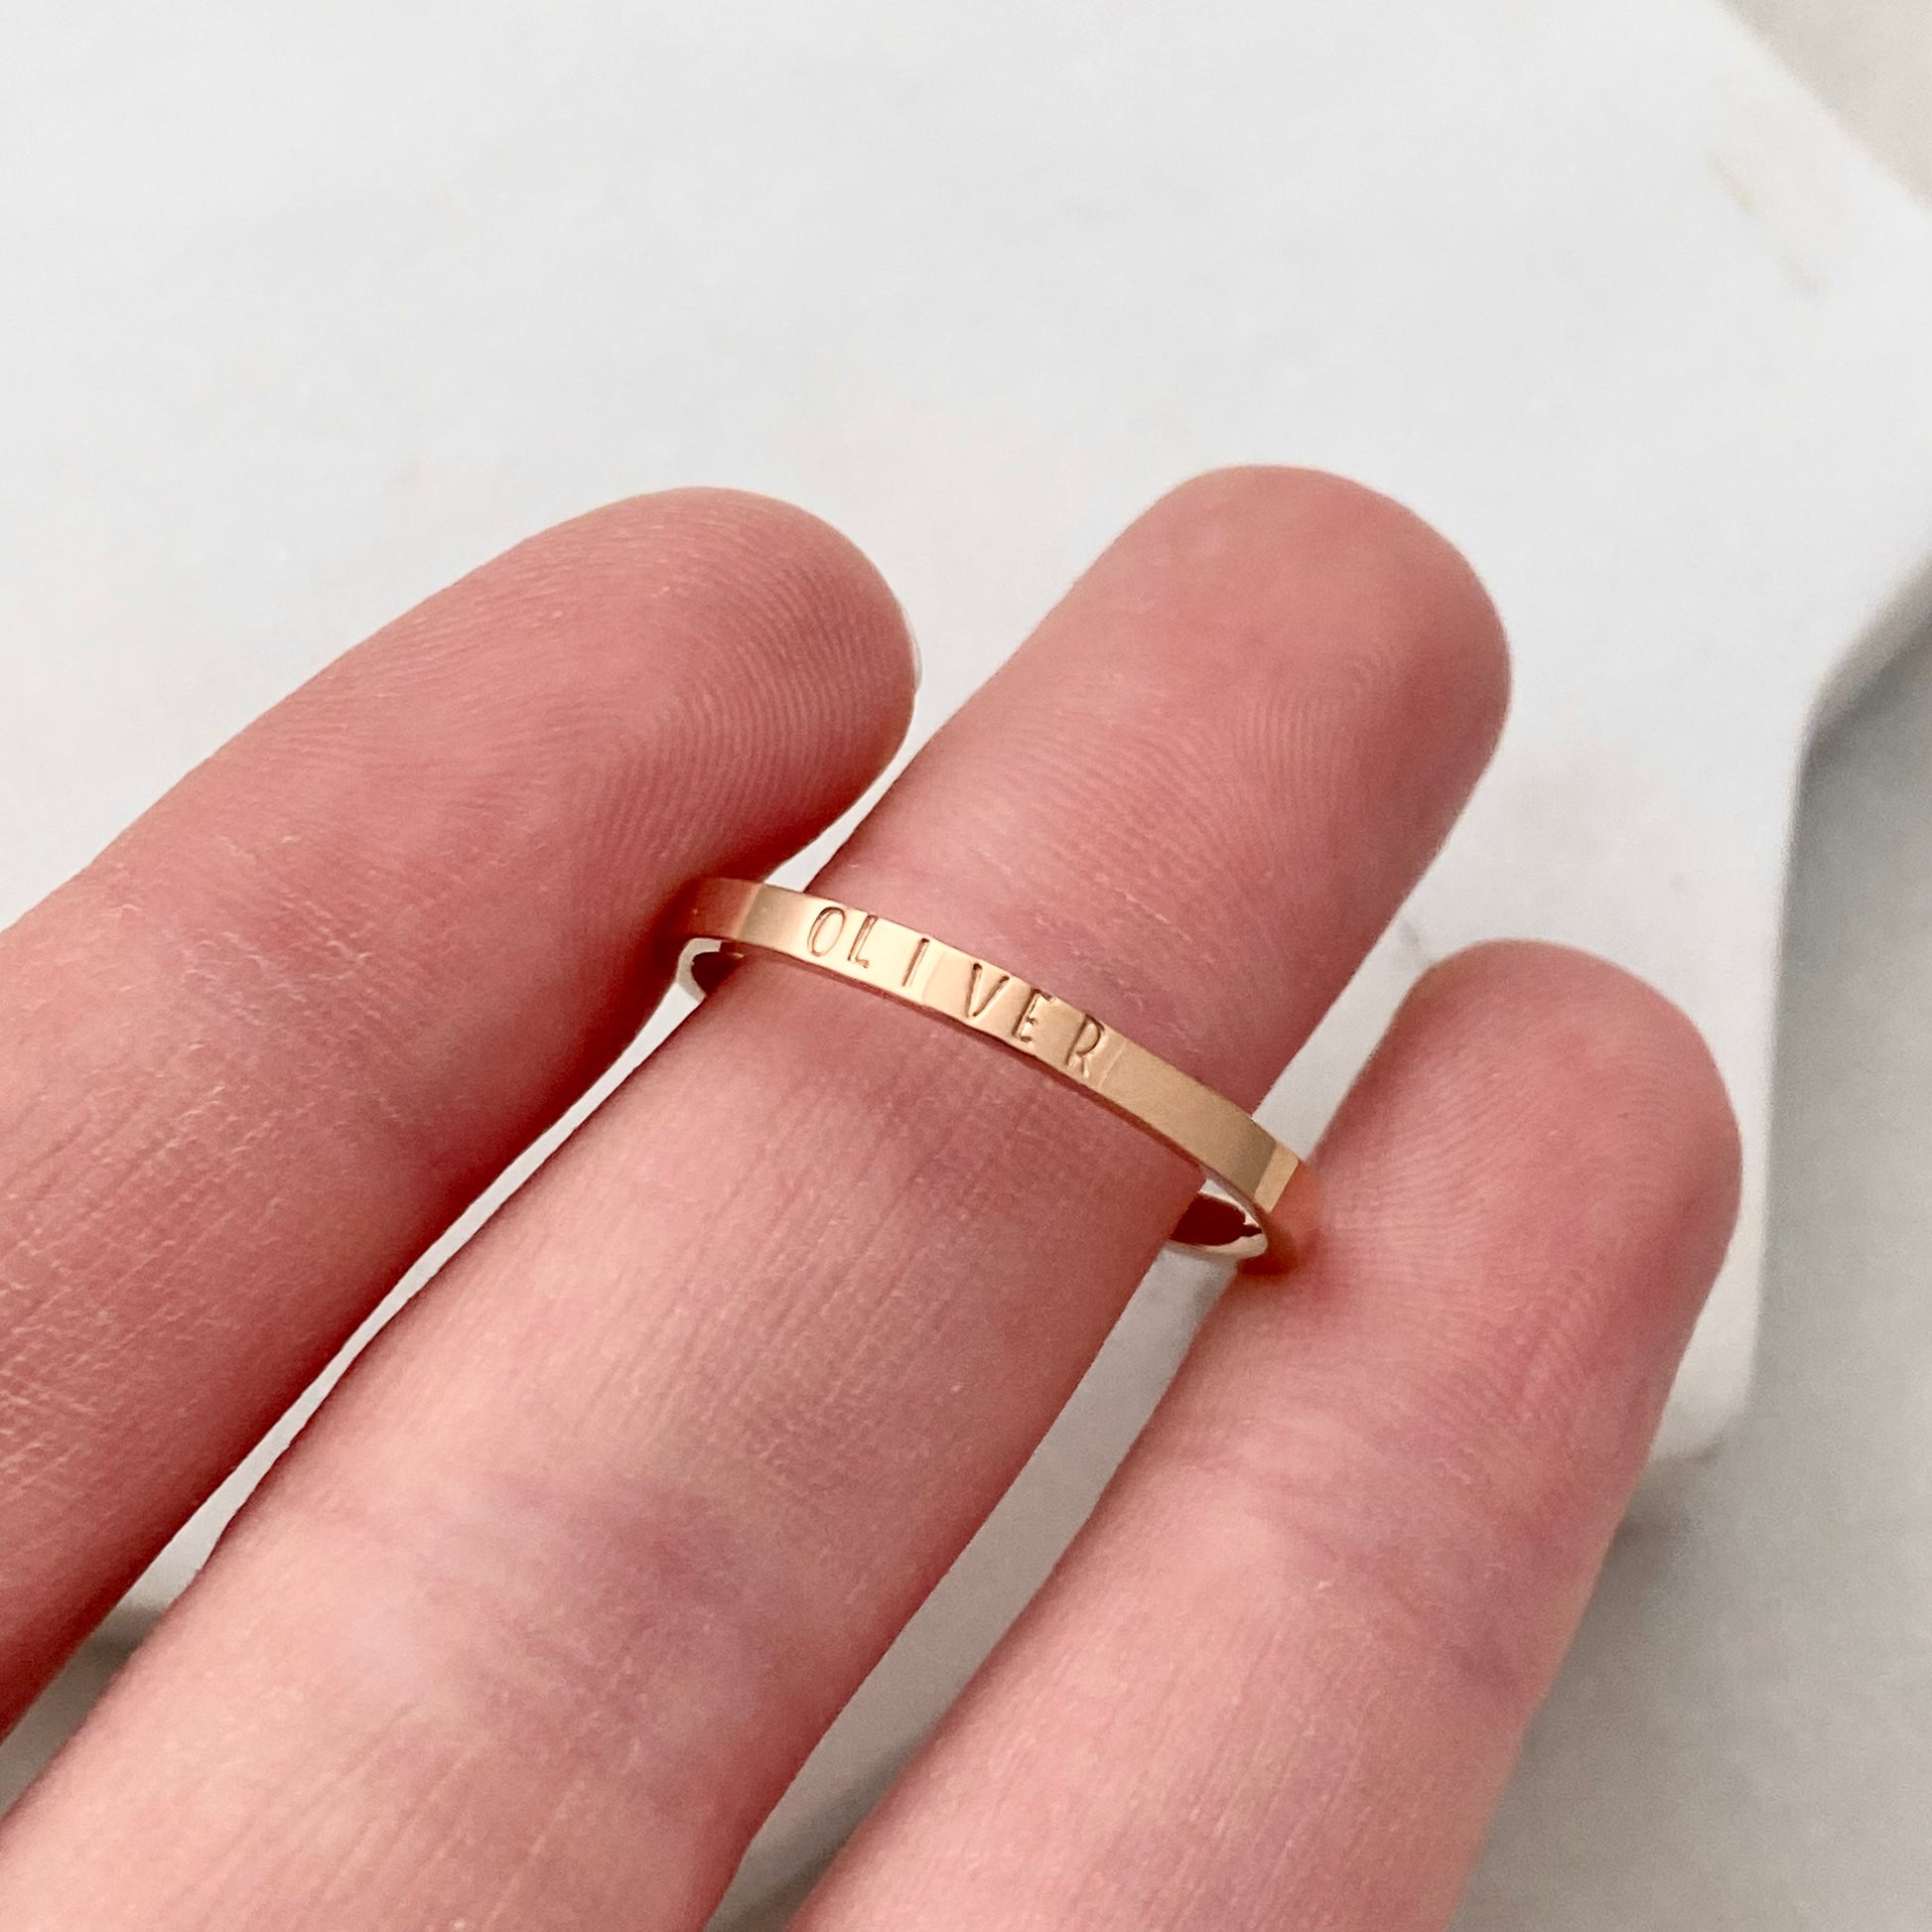 Oliver, Size 8, Rose Gold Mini Stacking Ring, Stainless Steel Jewelry, Minimalist Rings, Waterproof Jewelry, Dainty Ring, Stacking Ring Set Rings callistafaye   